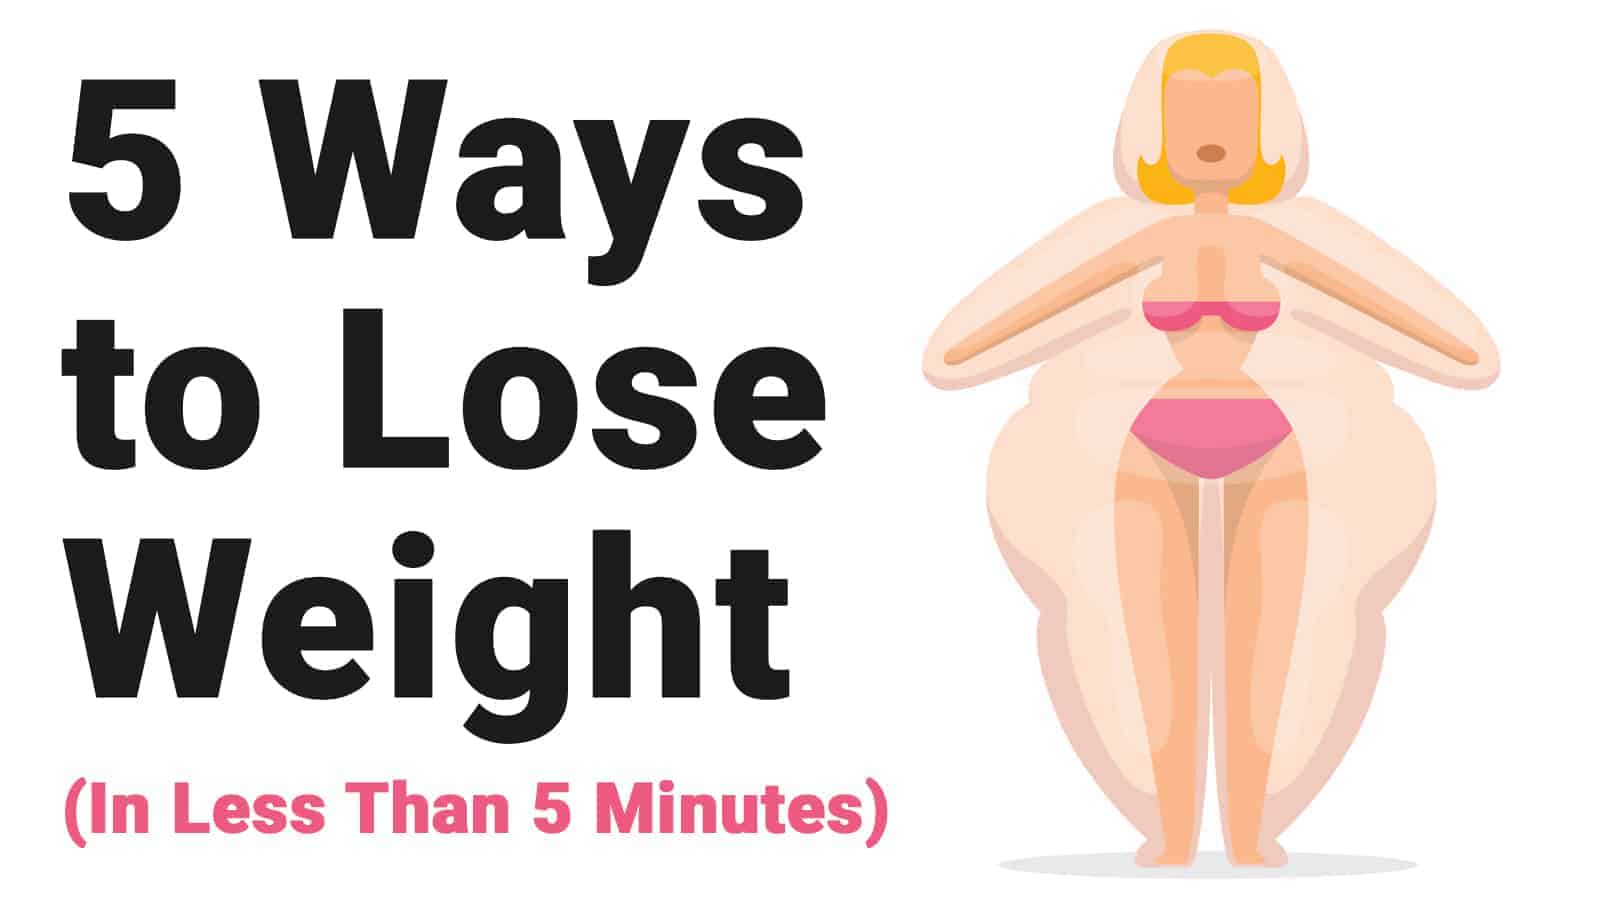 5 Ways to Lose Weight (in Less Than 5 Minutes)